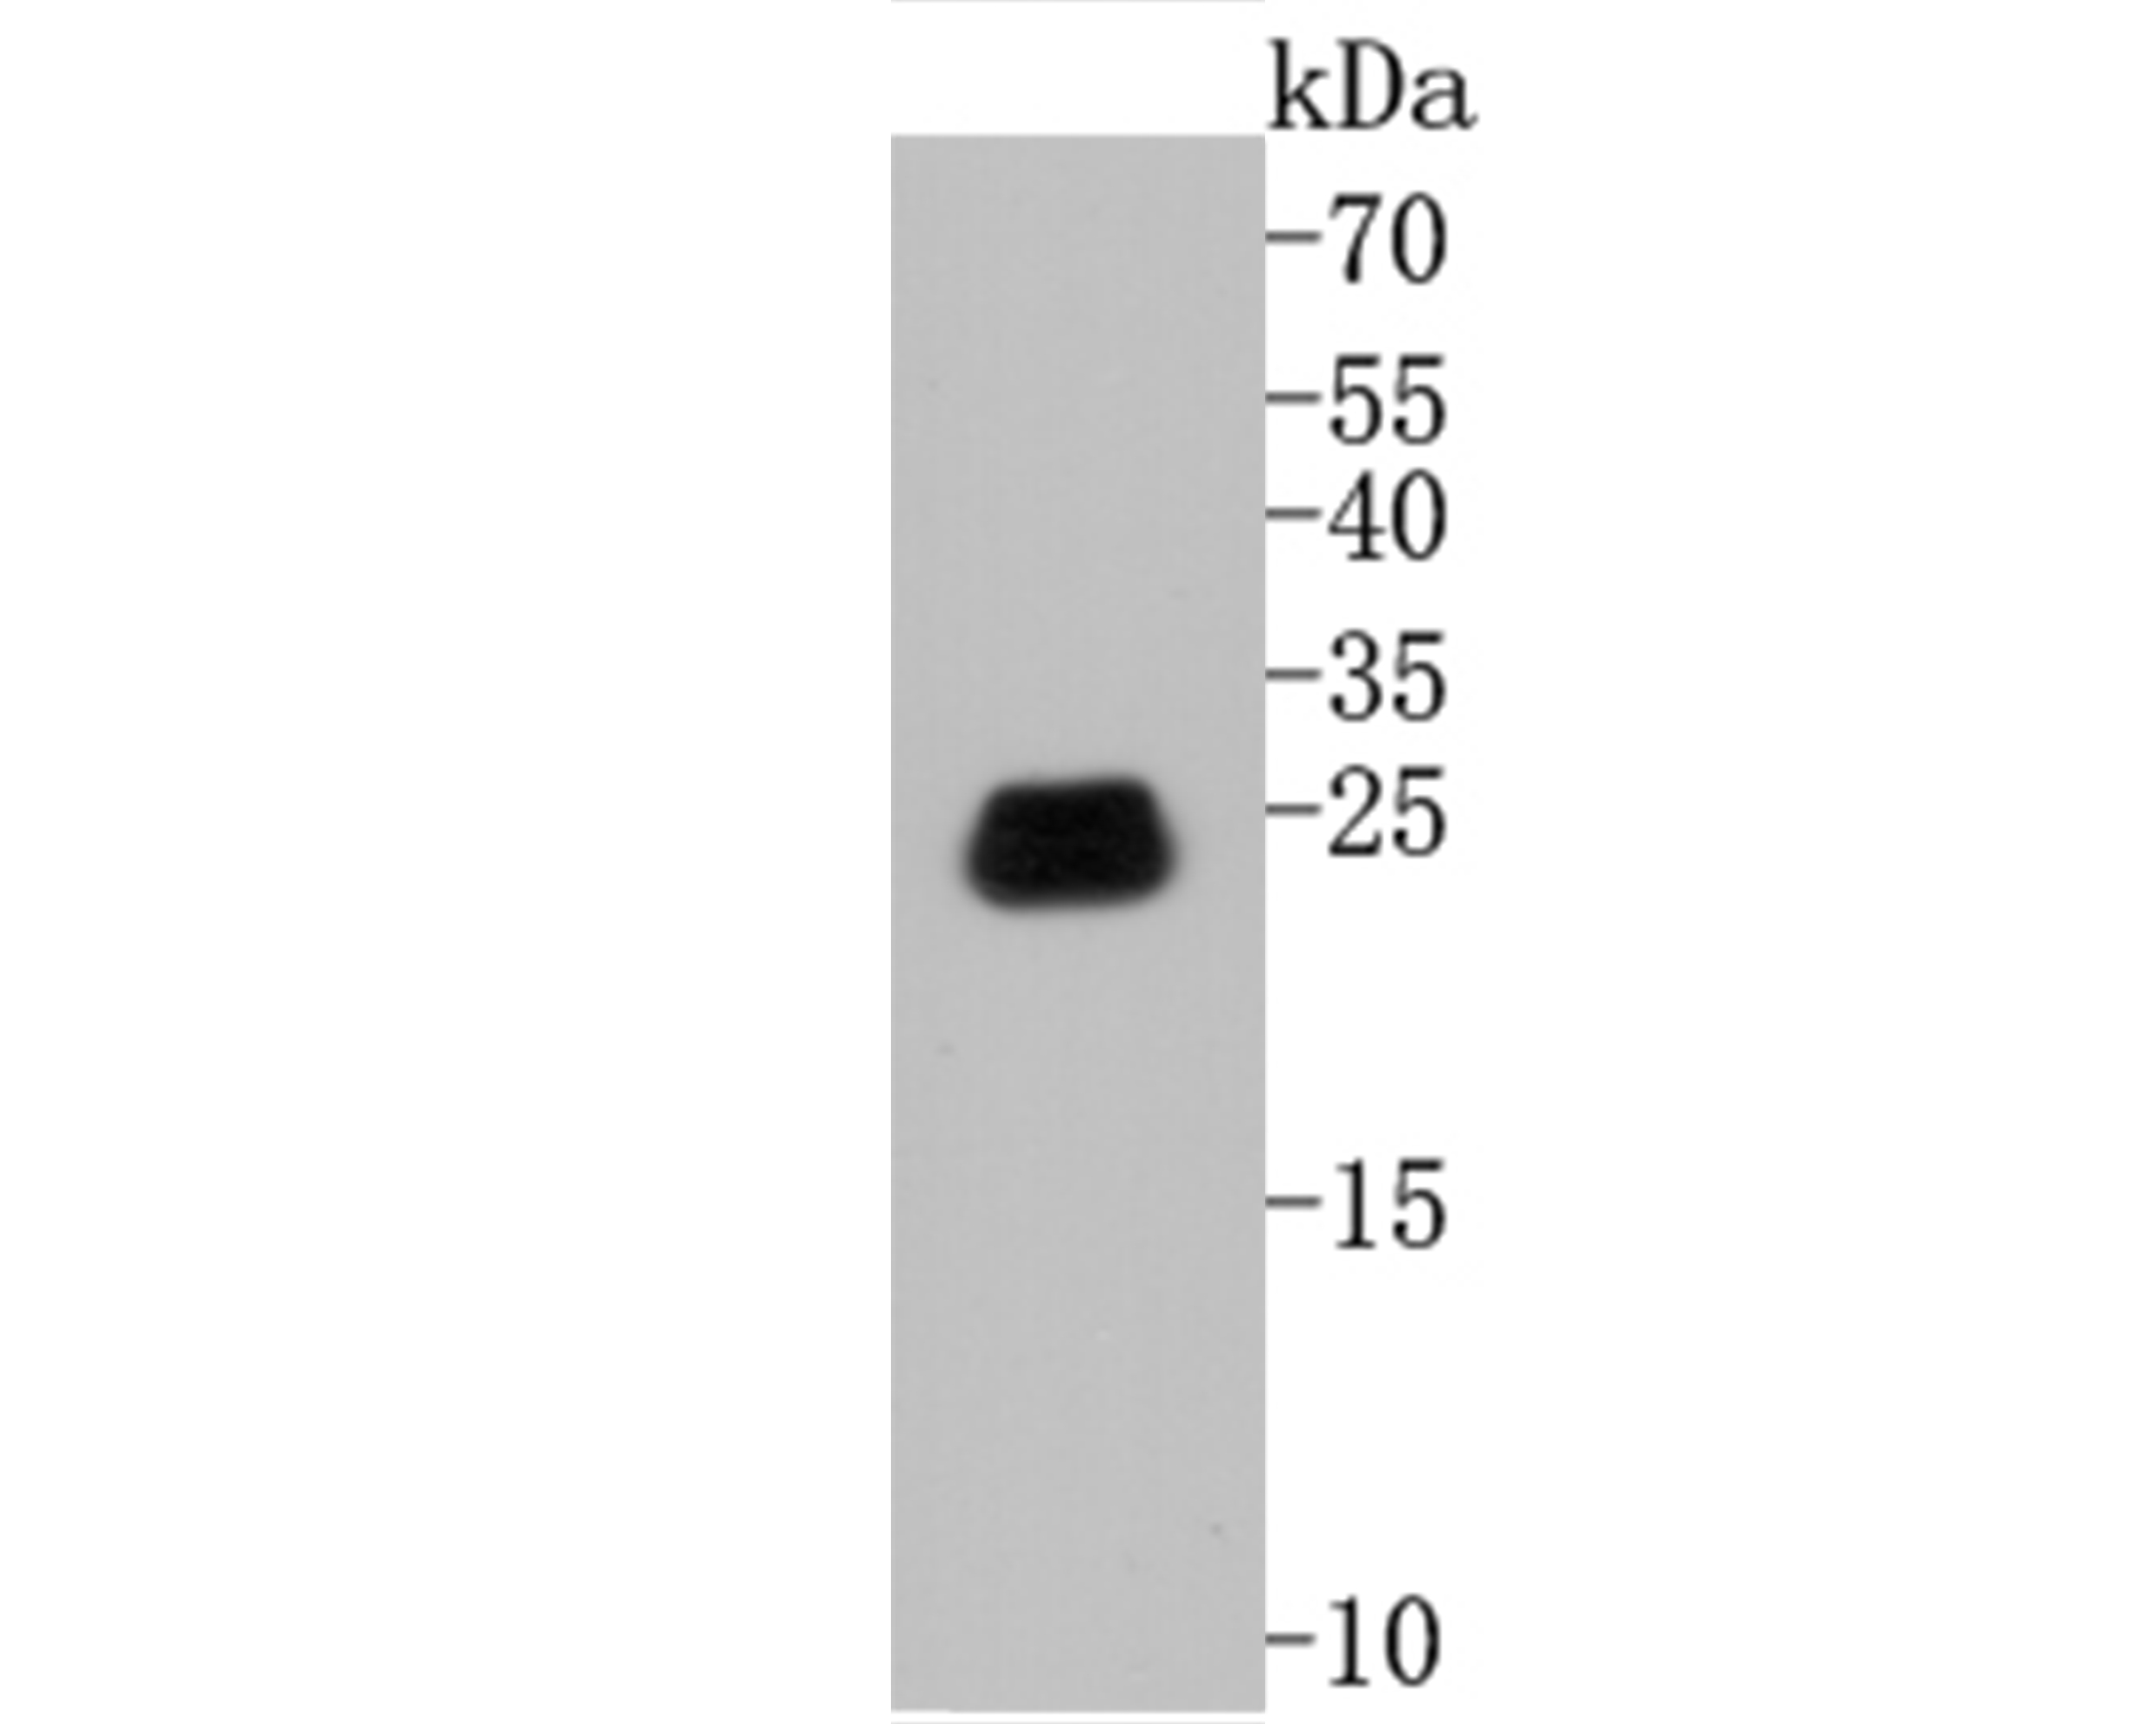 Western blot analysis of Caveolin-1 on SiHa cell lysates. Proteins were transferred to a PVDF membrane and blocked with 5% BSA in PBS for 1 hour at room temperature. The primary antibody (EM1902-01, 1/500) was used in 5% BSA at room temperature for 2 hours. Goat Anti-Mouse IgG - HRP Secondary Antibody (HA1006) at 1:5,000 dilution was used for 1 hour at room temperature.